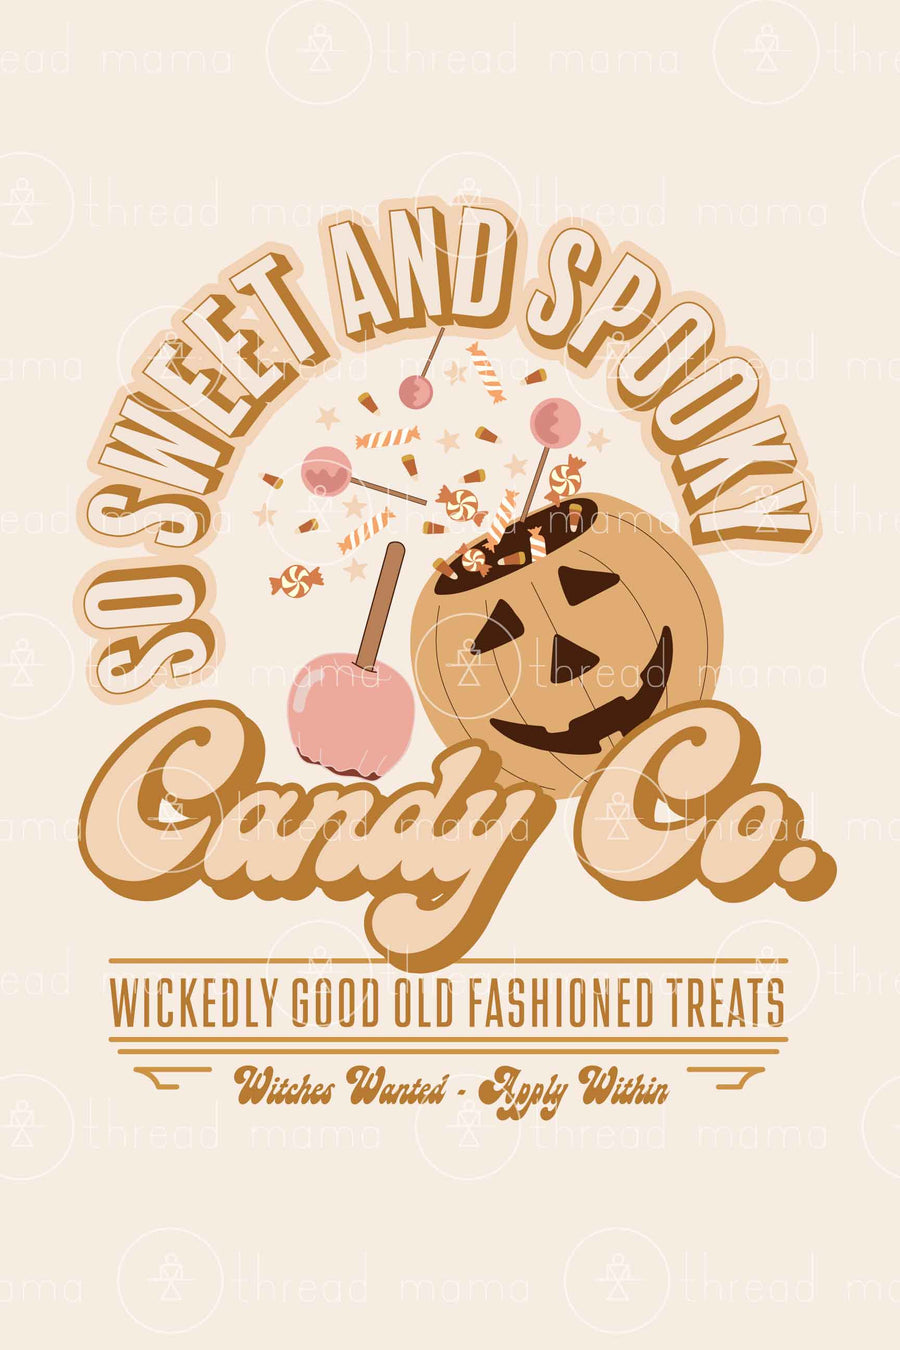 Candy Co (Printable Poster)